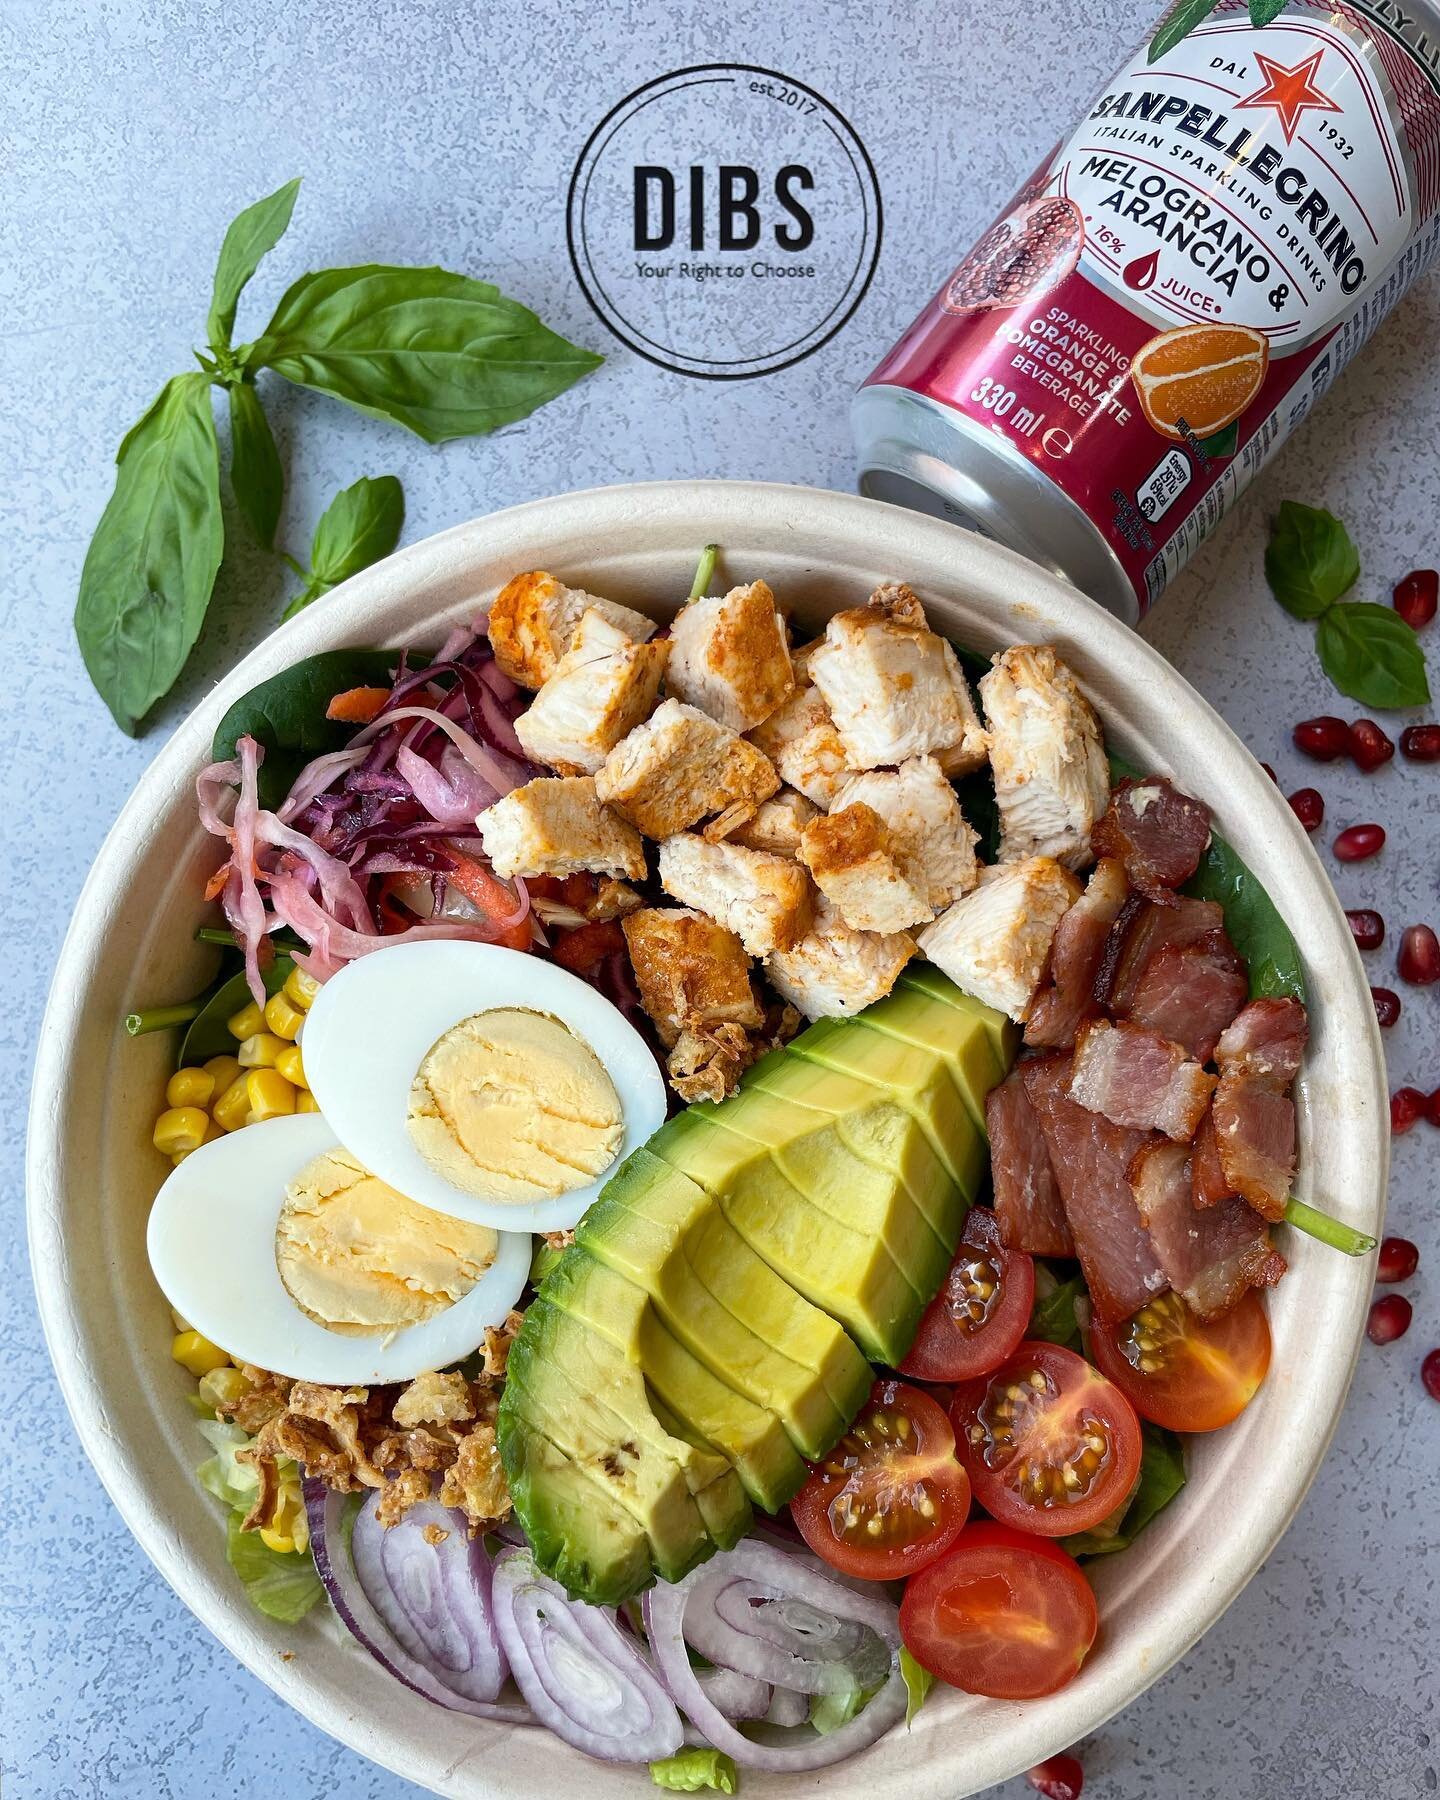 Have you tried our new Cobb&rsquo;s bowl? 👀😋

Our bowls are all freshly prepared and ready to go 🥗 

#dibs #dibsuk